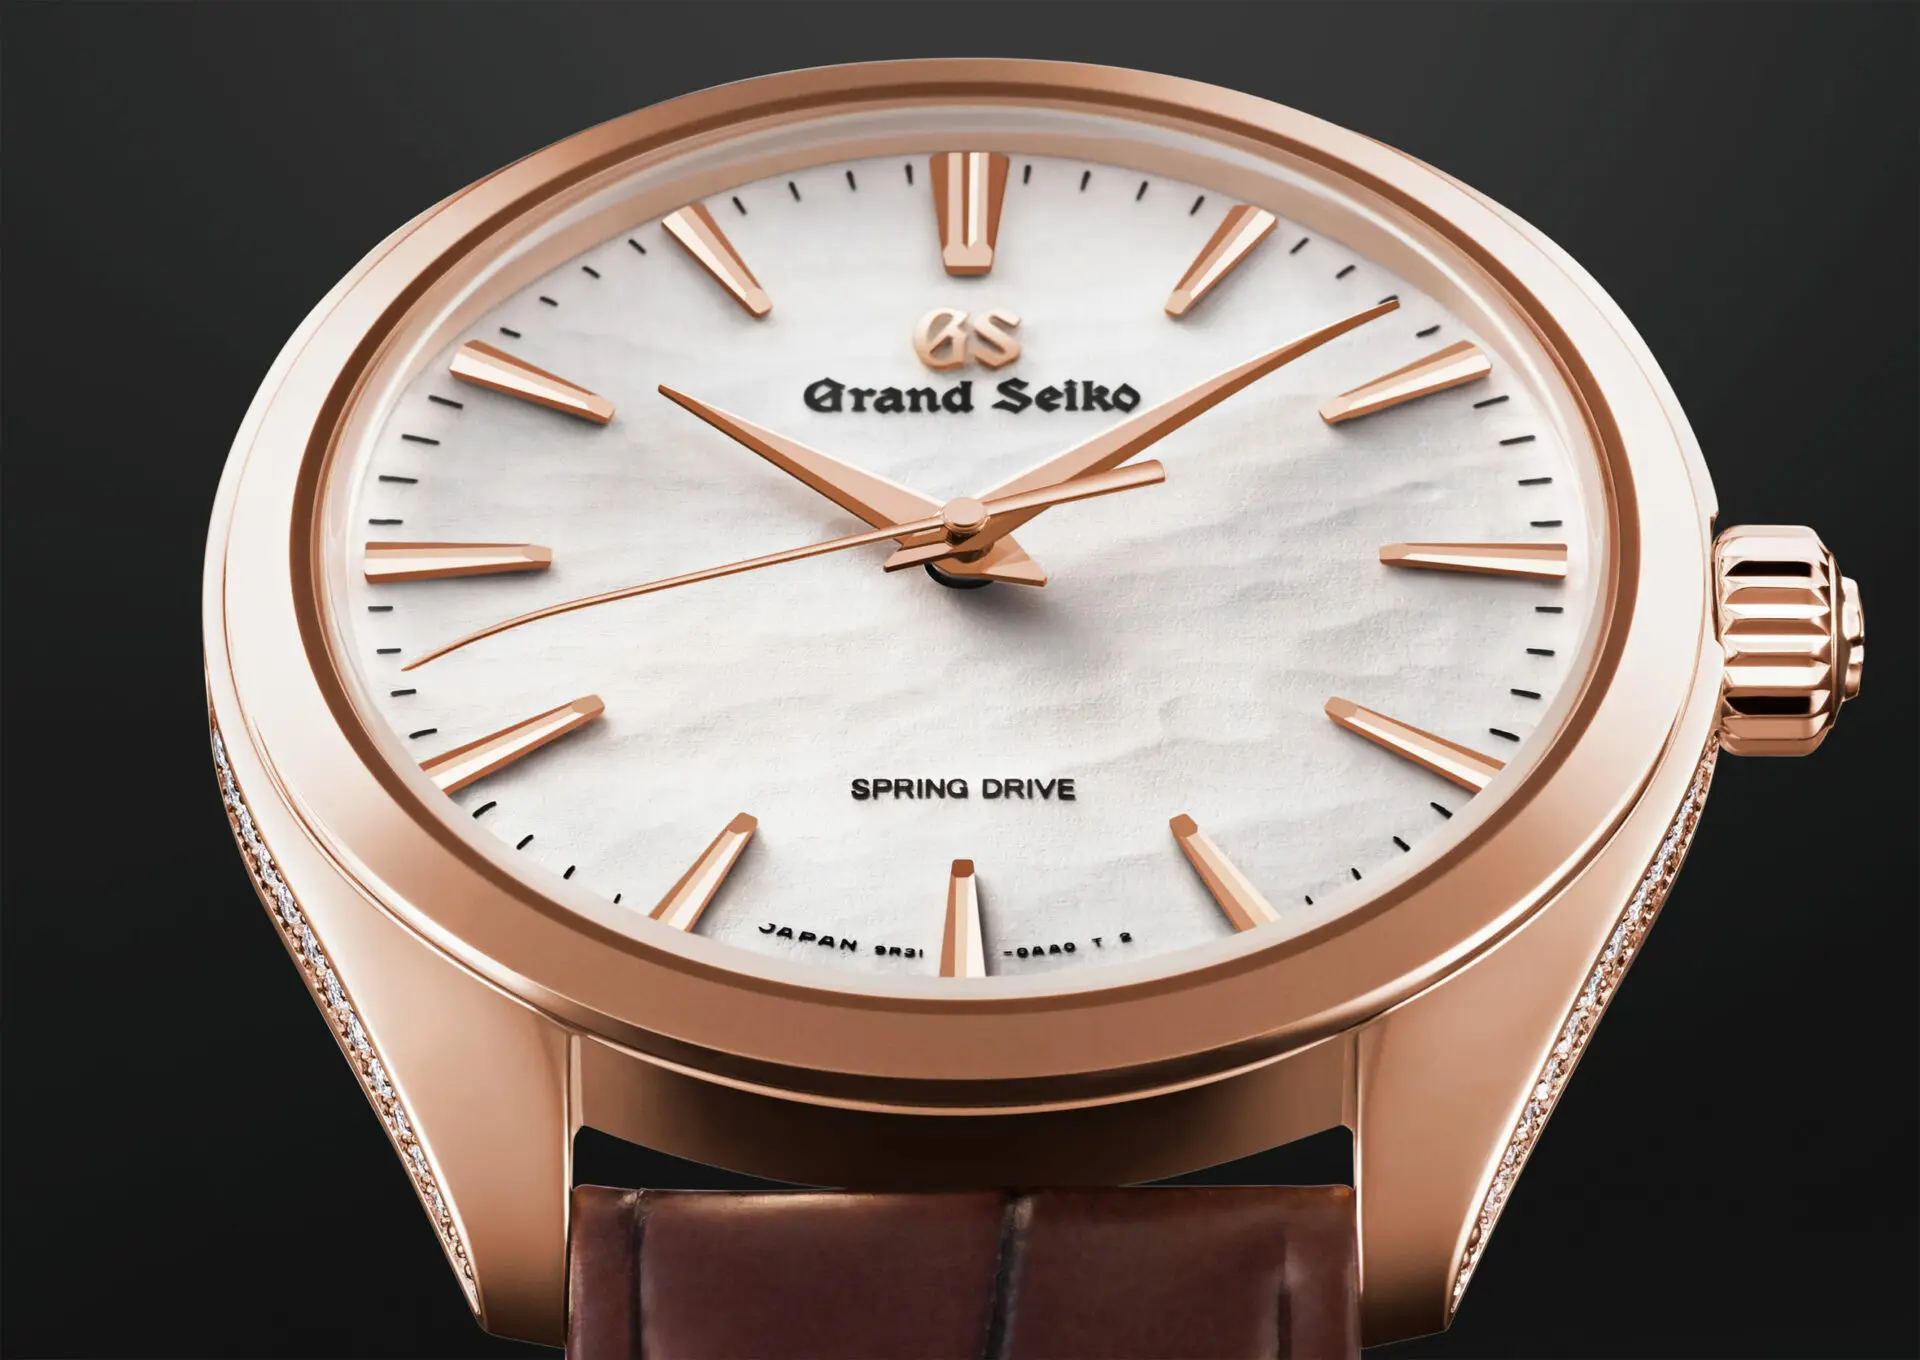 INTRODUCING: the Grand Seiko SBGY008 Limited Edition